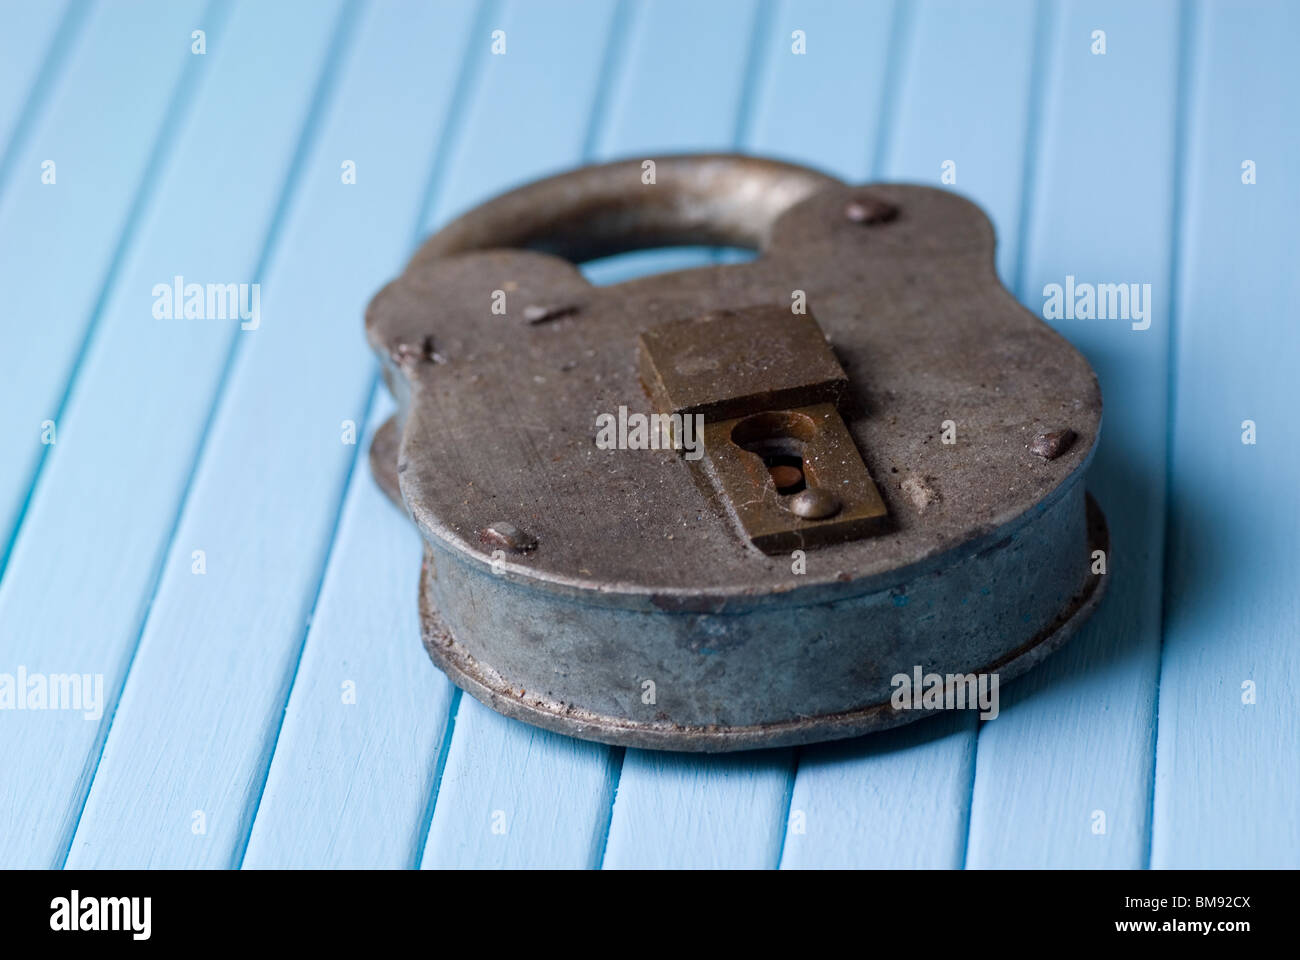 Old rusty lock on blue wooden background Stock Photo